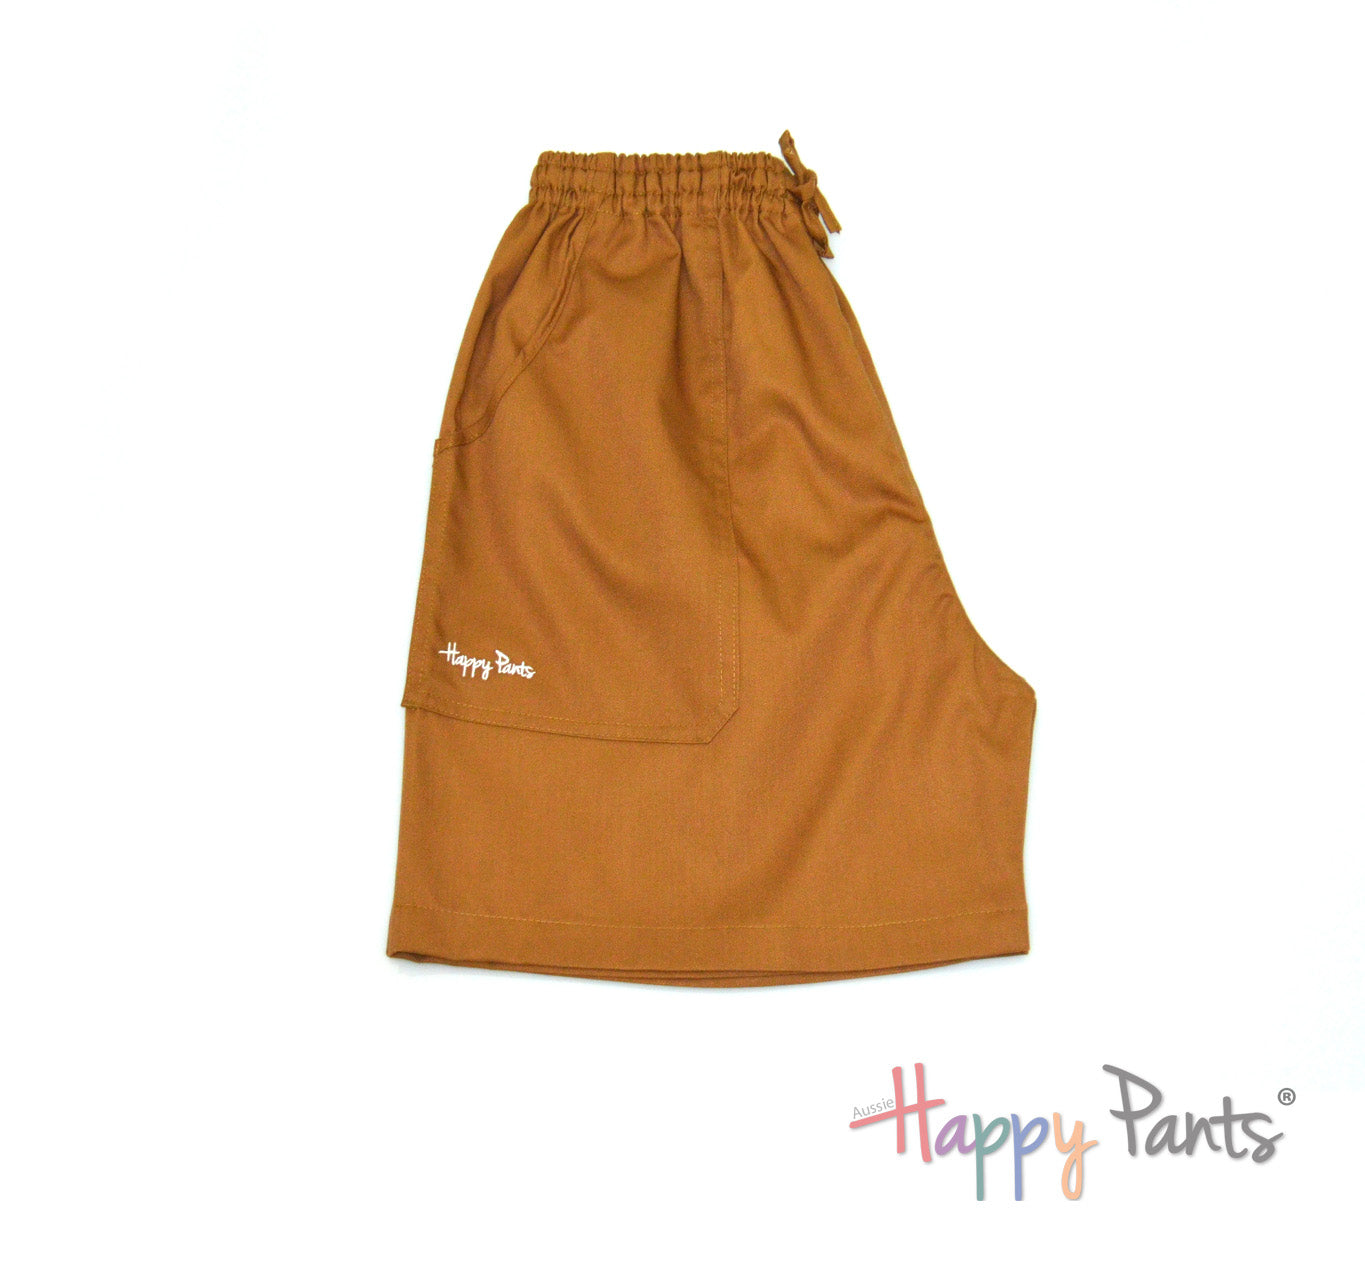 Colourful shorts for ladies and men cotton boardshorts comfortable plus sizes